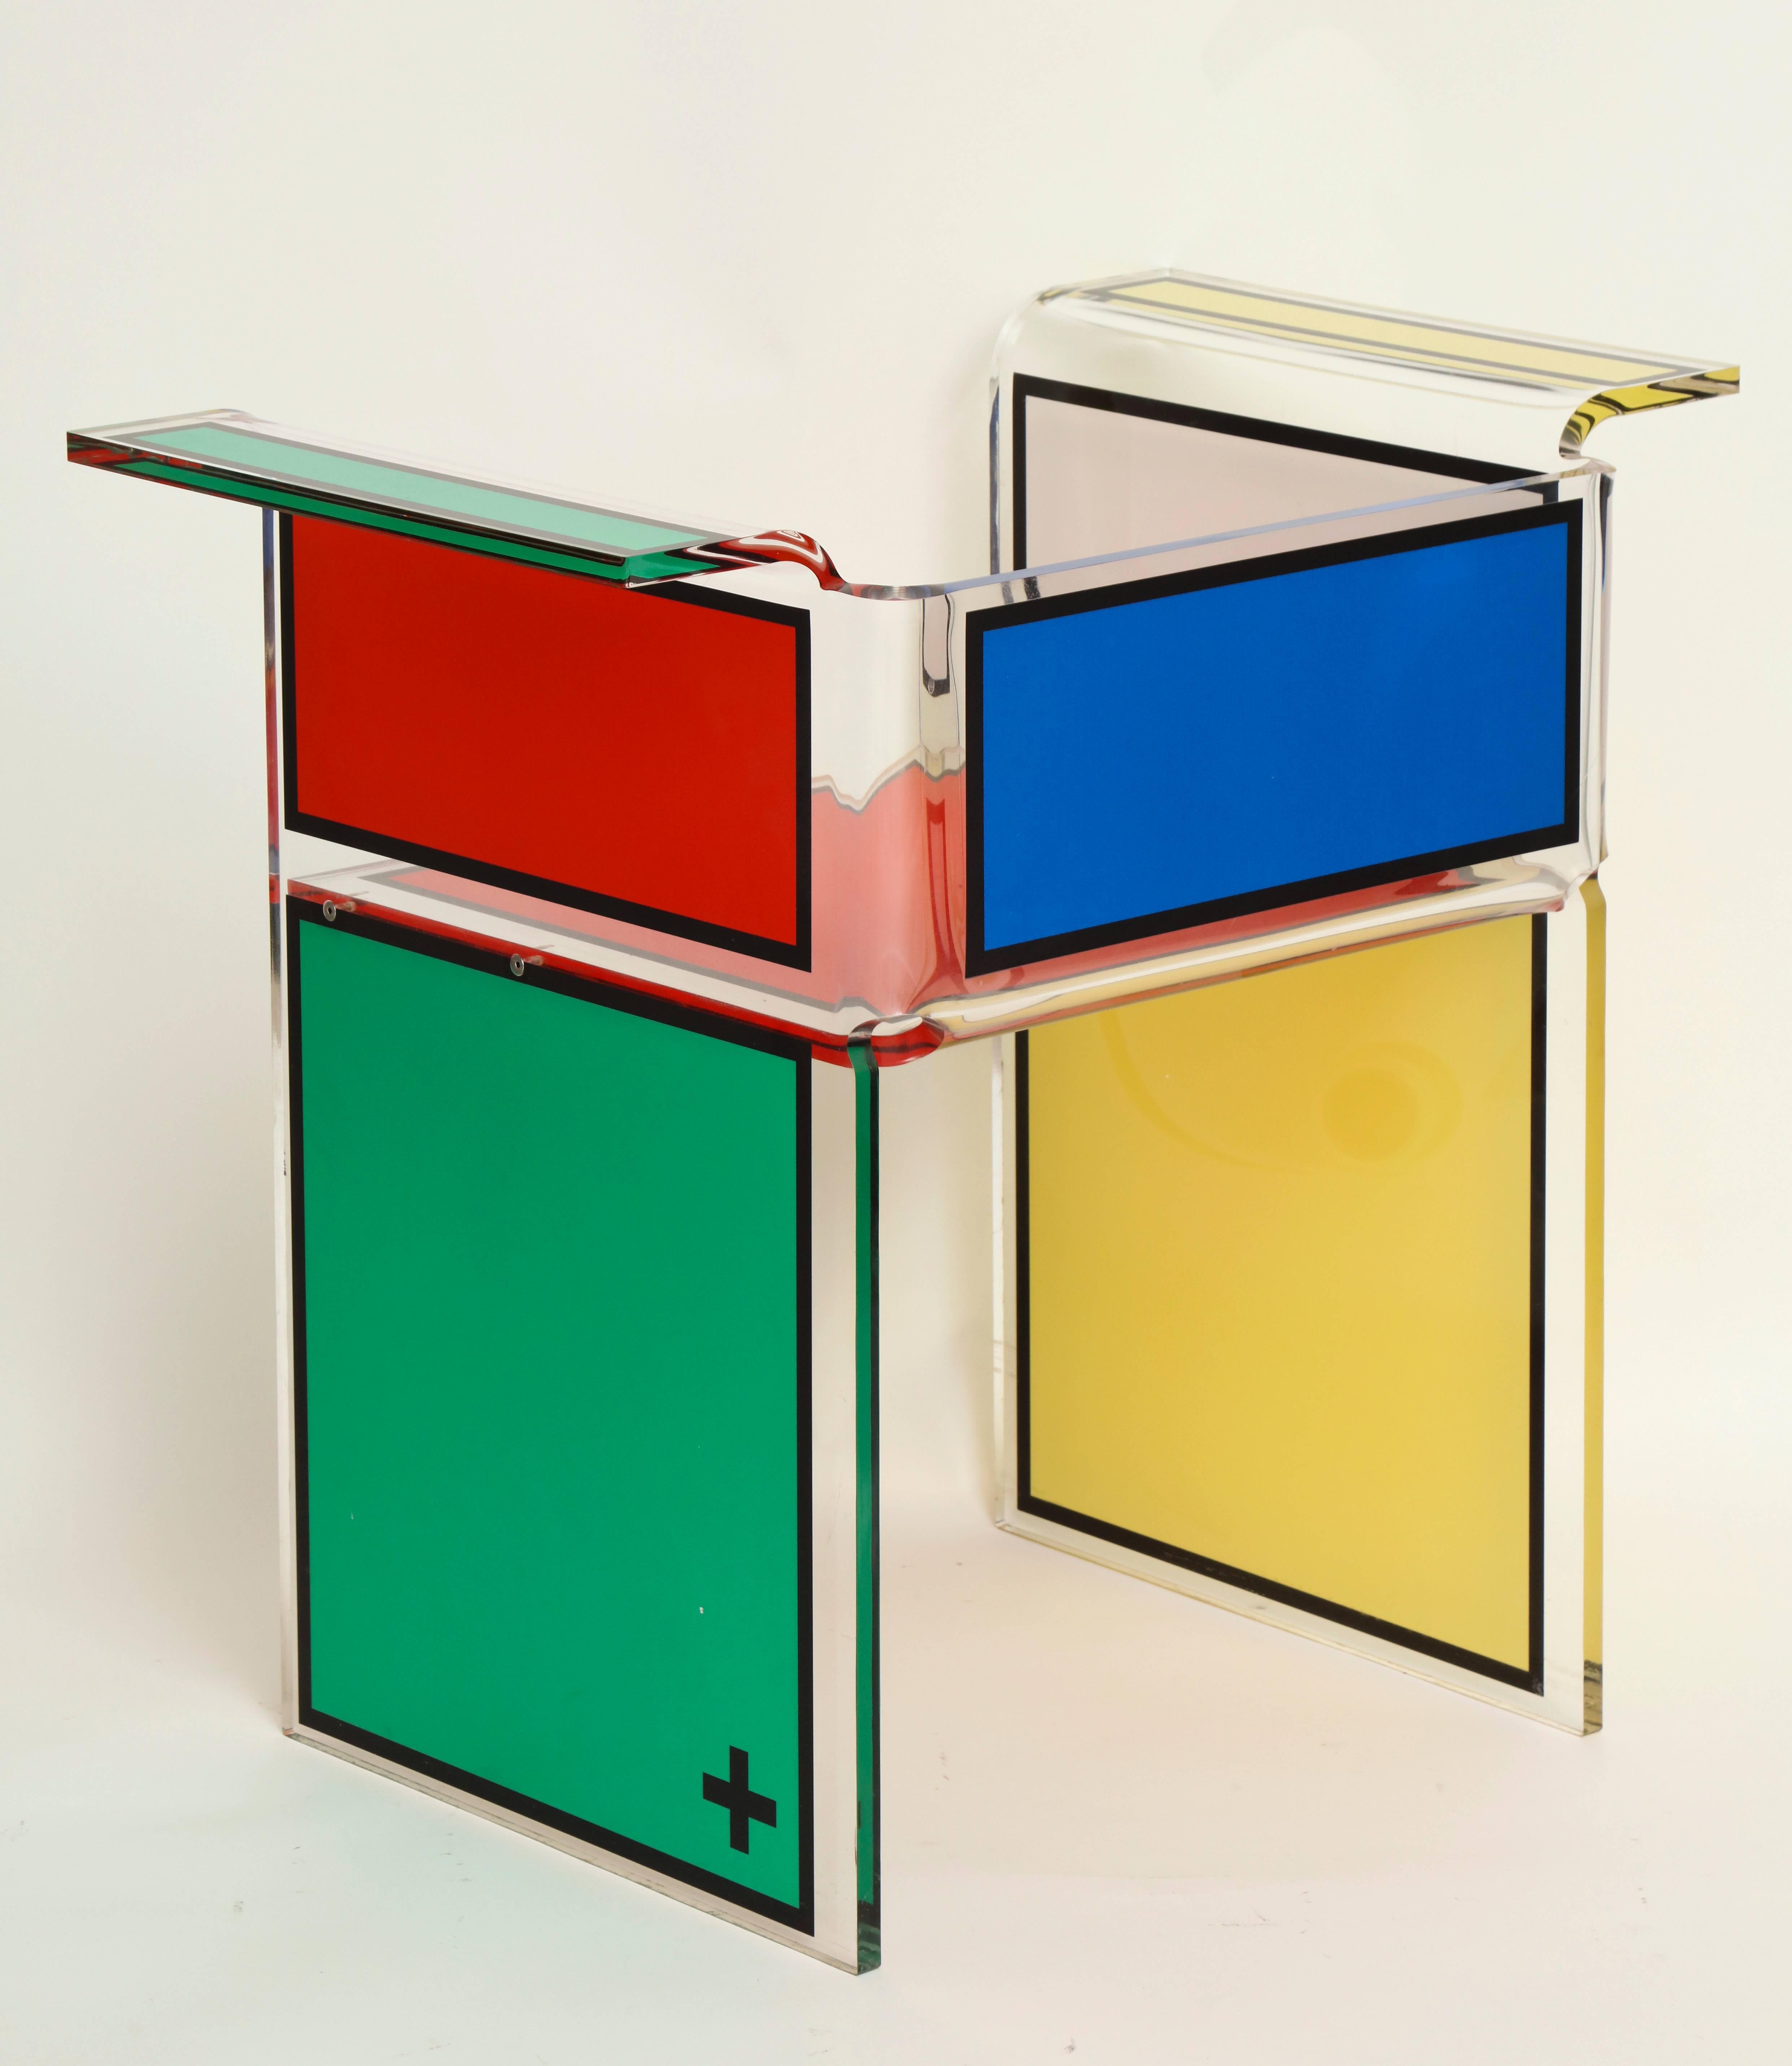 The chair is mono-block acrylic (i.e. no screws or adhesive bonding is used.)

Each side of a chair has a different color (four colors in total red, yellow, green, blue) imprinted on the back of the acrylic glass by Digital Laser Printing.